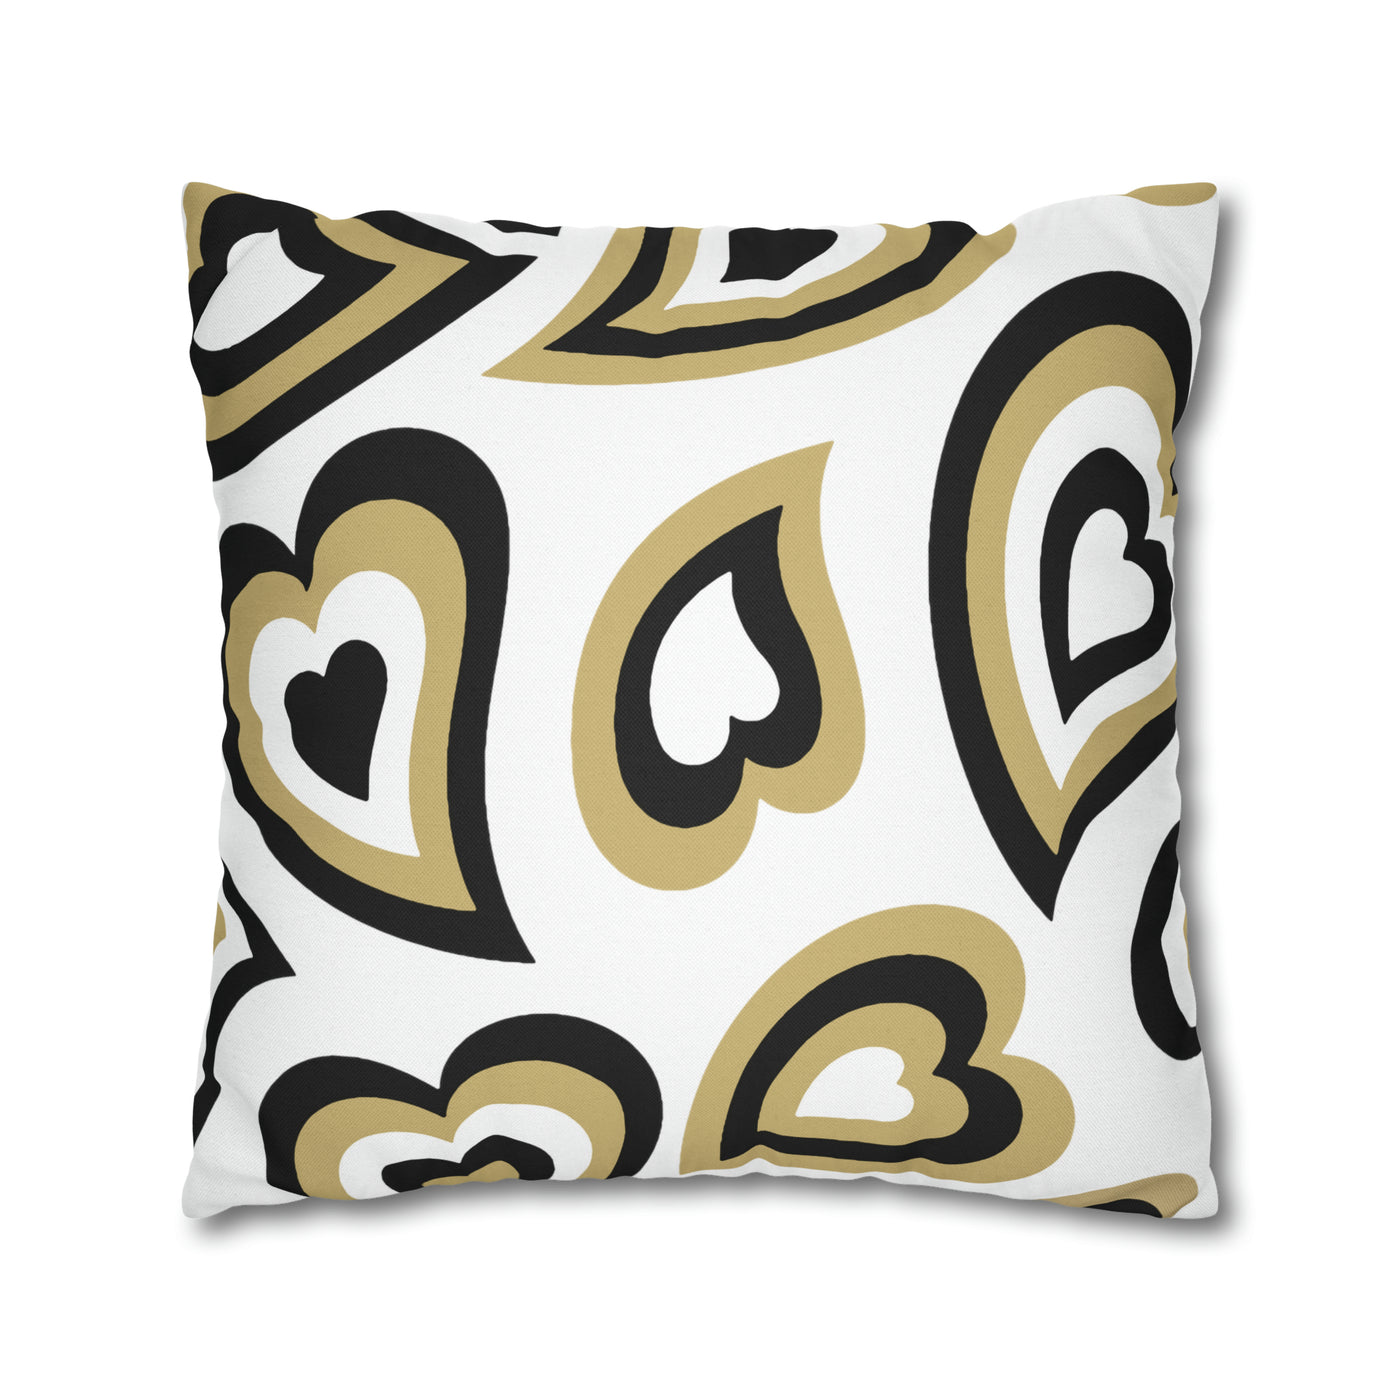 Retro Heart Pillow - Gold and Black, Heart Pillow, Hearts, Valentine's Day, UCF, Boulder, Wake Forest, Bed Party Pillow, Camp, dorm decor,